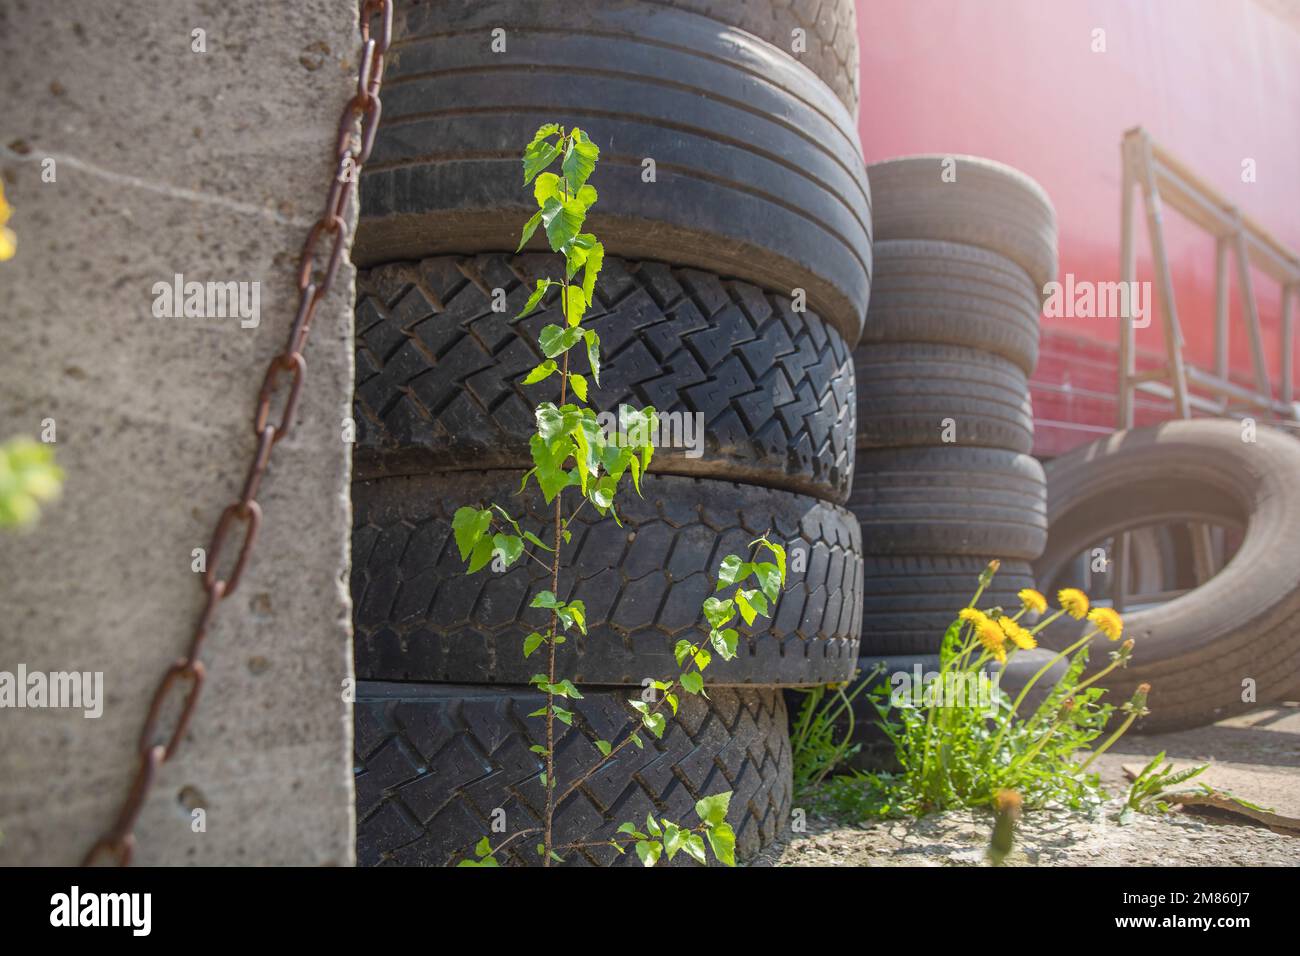 Ecological catastrophy. Environmental pollution. Old tires are thrown away, flowers grow nearby. The concept of pollution of nature. Stock Photo